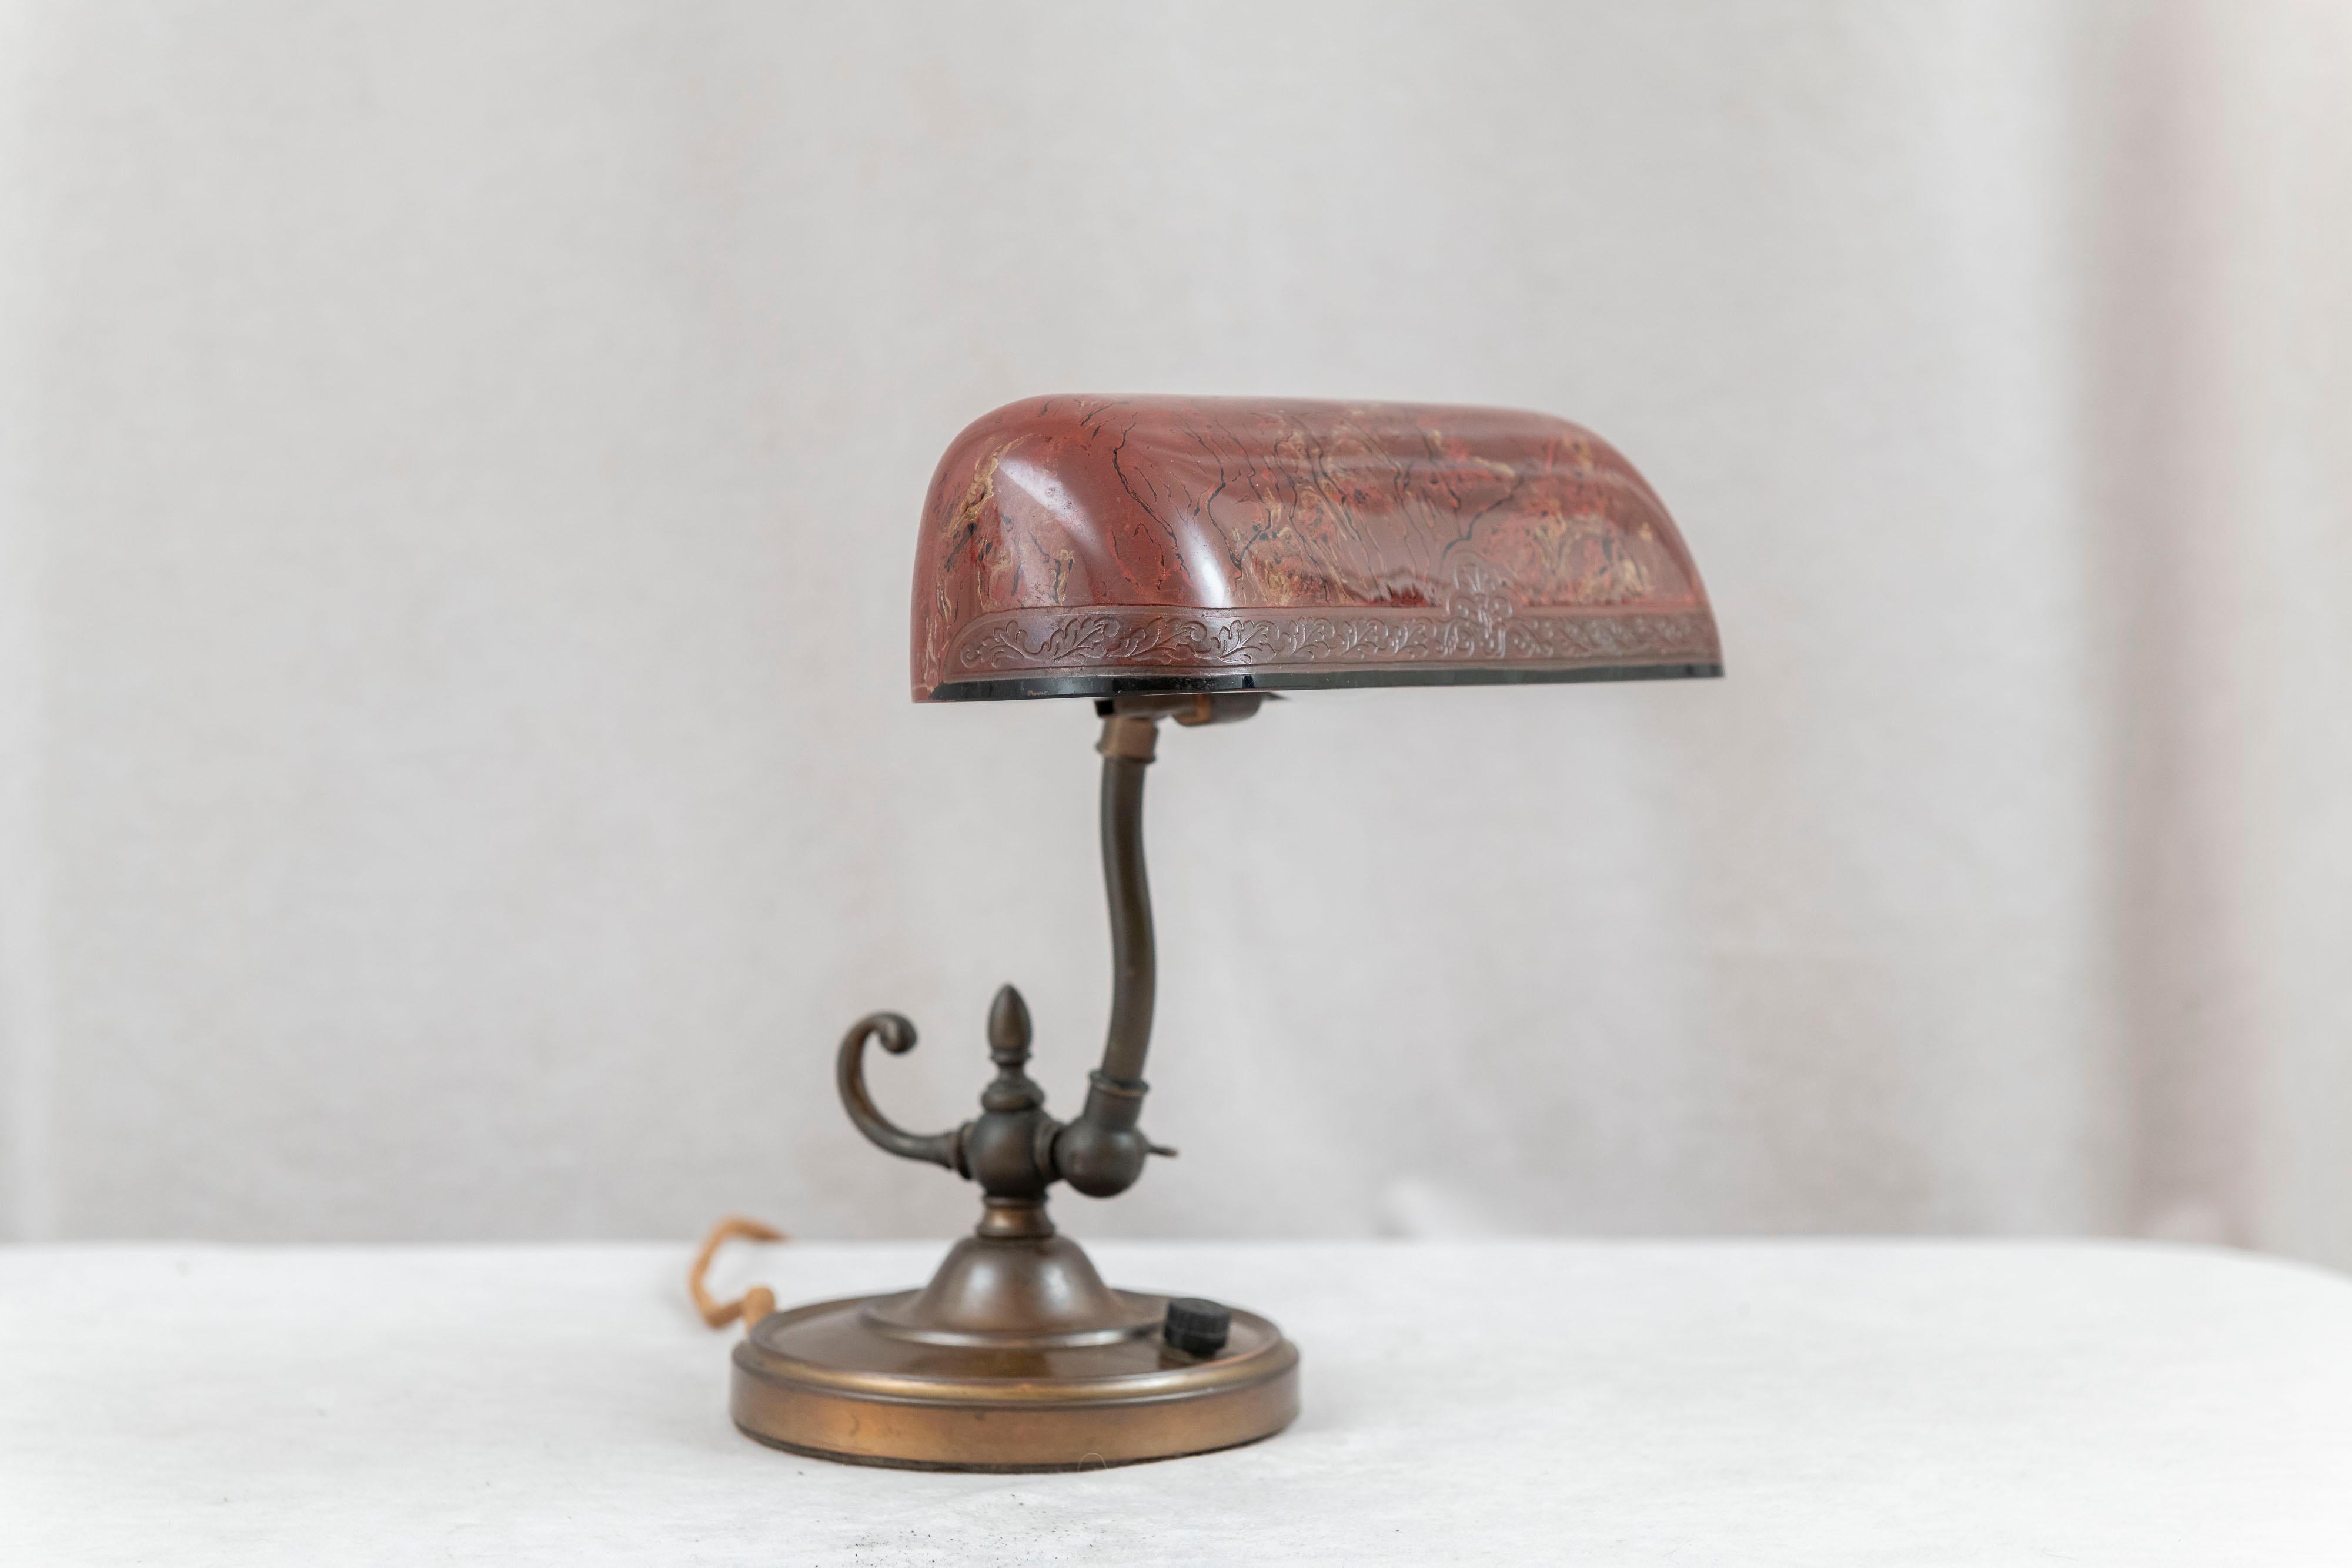   This very high quality desk lamp was produced by the Emeralite Co. The most respected and famous makers of Banker's lamps. On occasion when the company wanted a special glass shade, they had the Bellova Co. of Czechoslovakia make one, like ours.